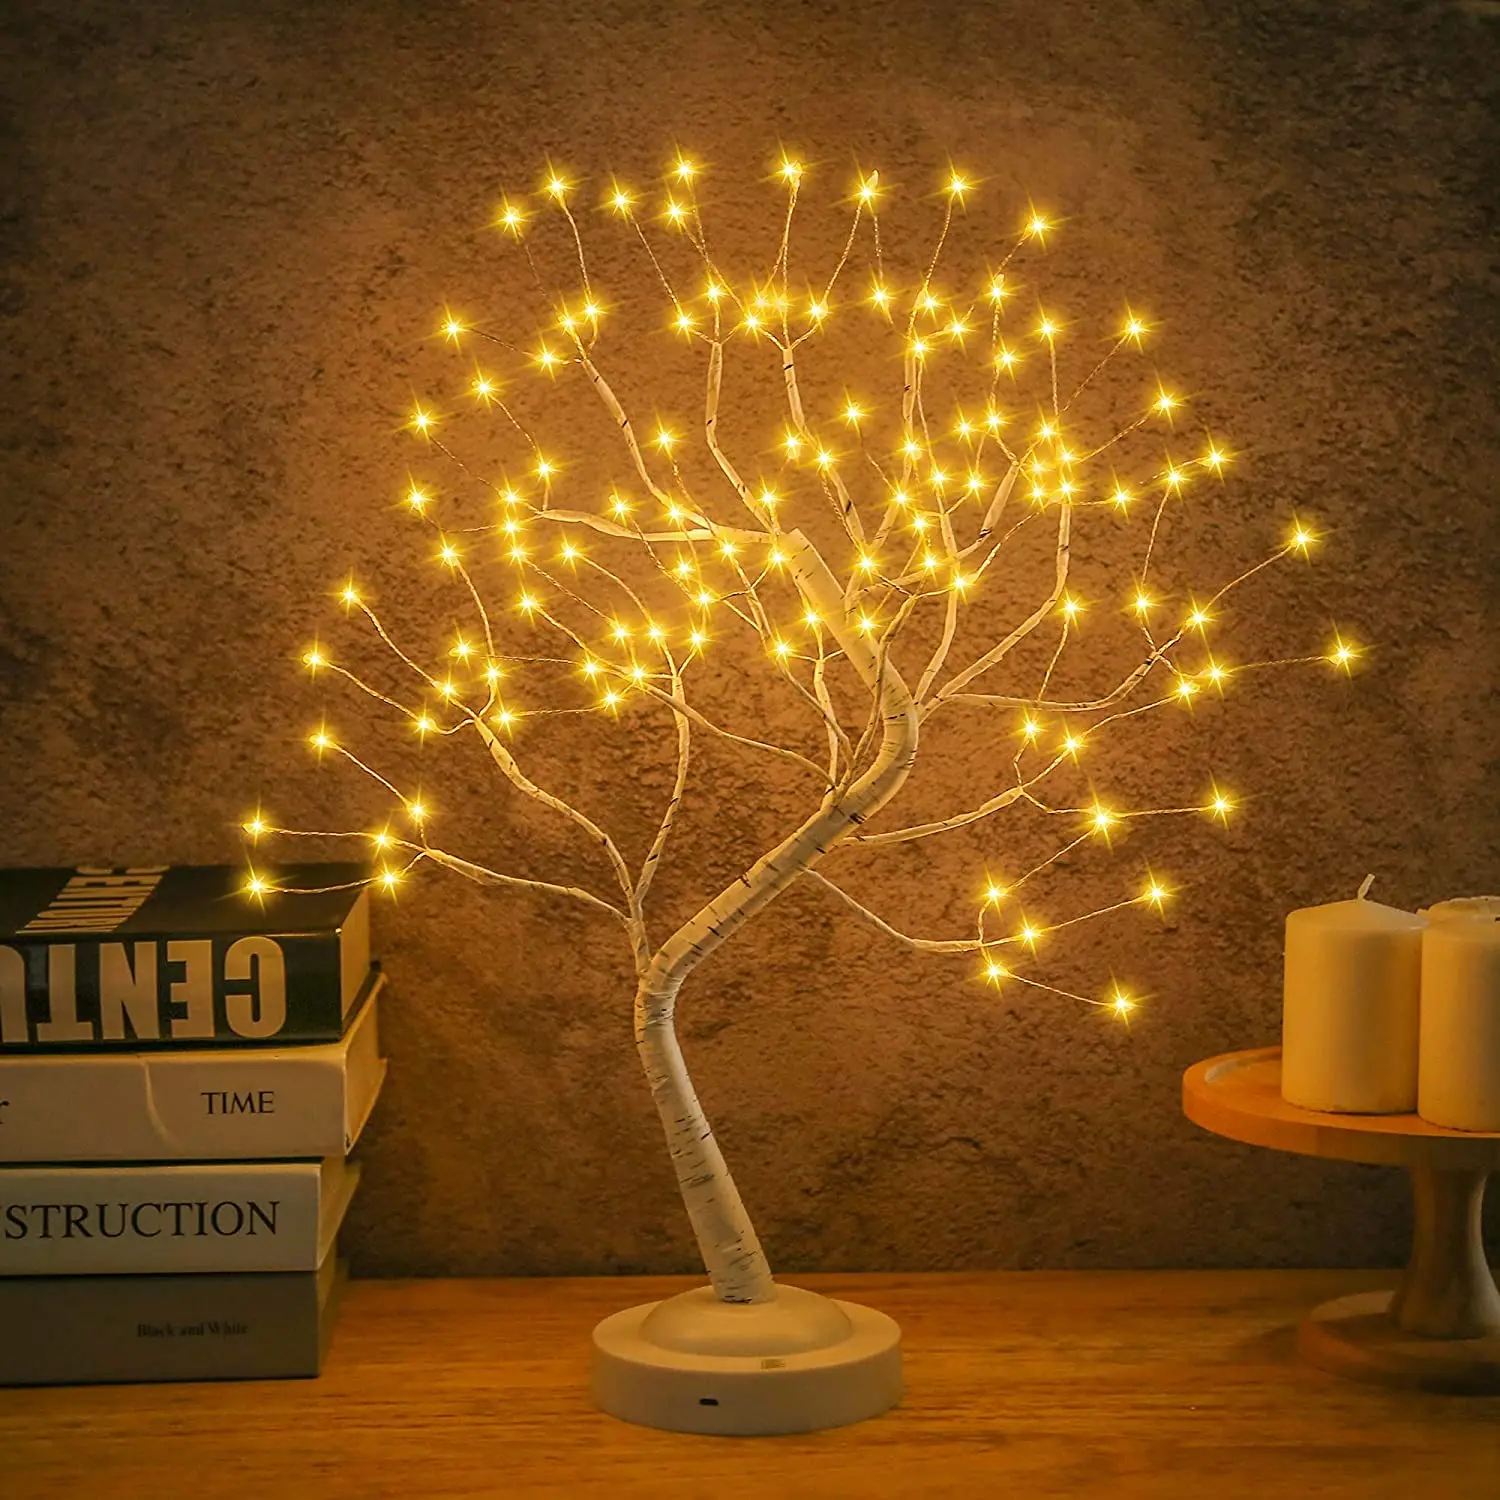 Ree night light 108leds touch switch fairy brich night lamp table lamp for home bedroom thumb200